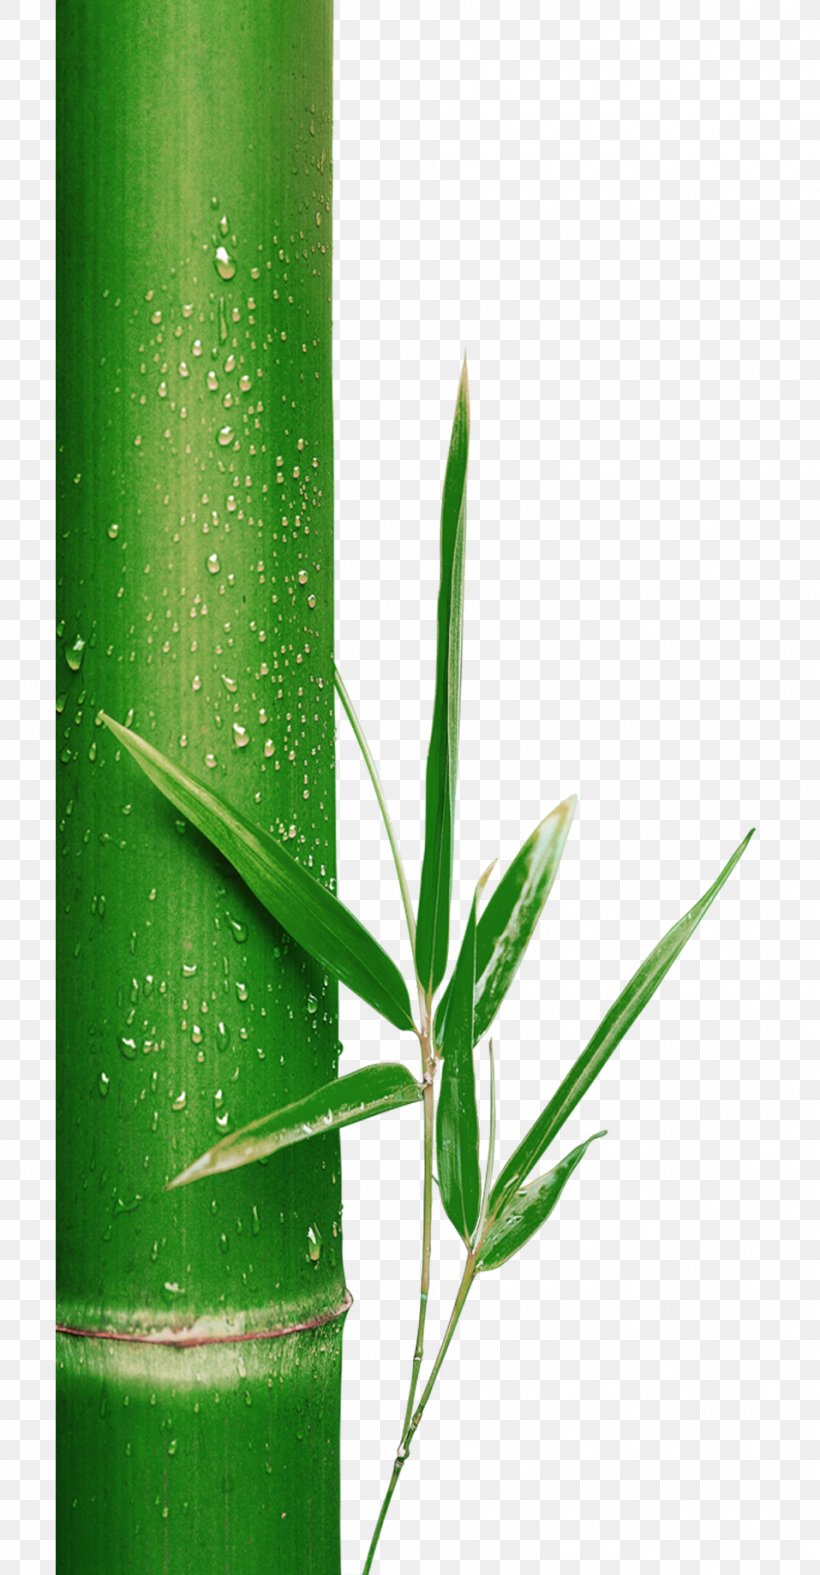 Bamboo Bamboe Leaf Green, PNG, 957x1839px, Bamboo, Bamboe, Grass, Grass Family, Gratis Download Free